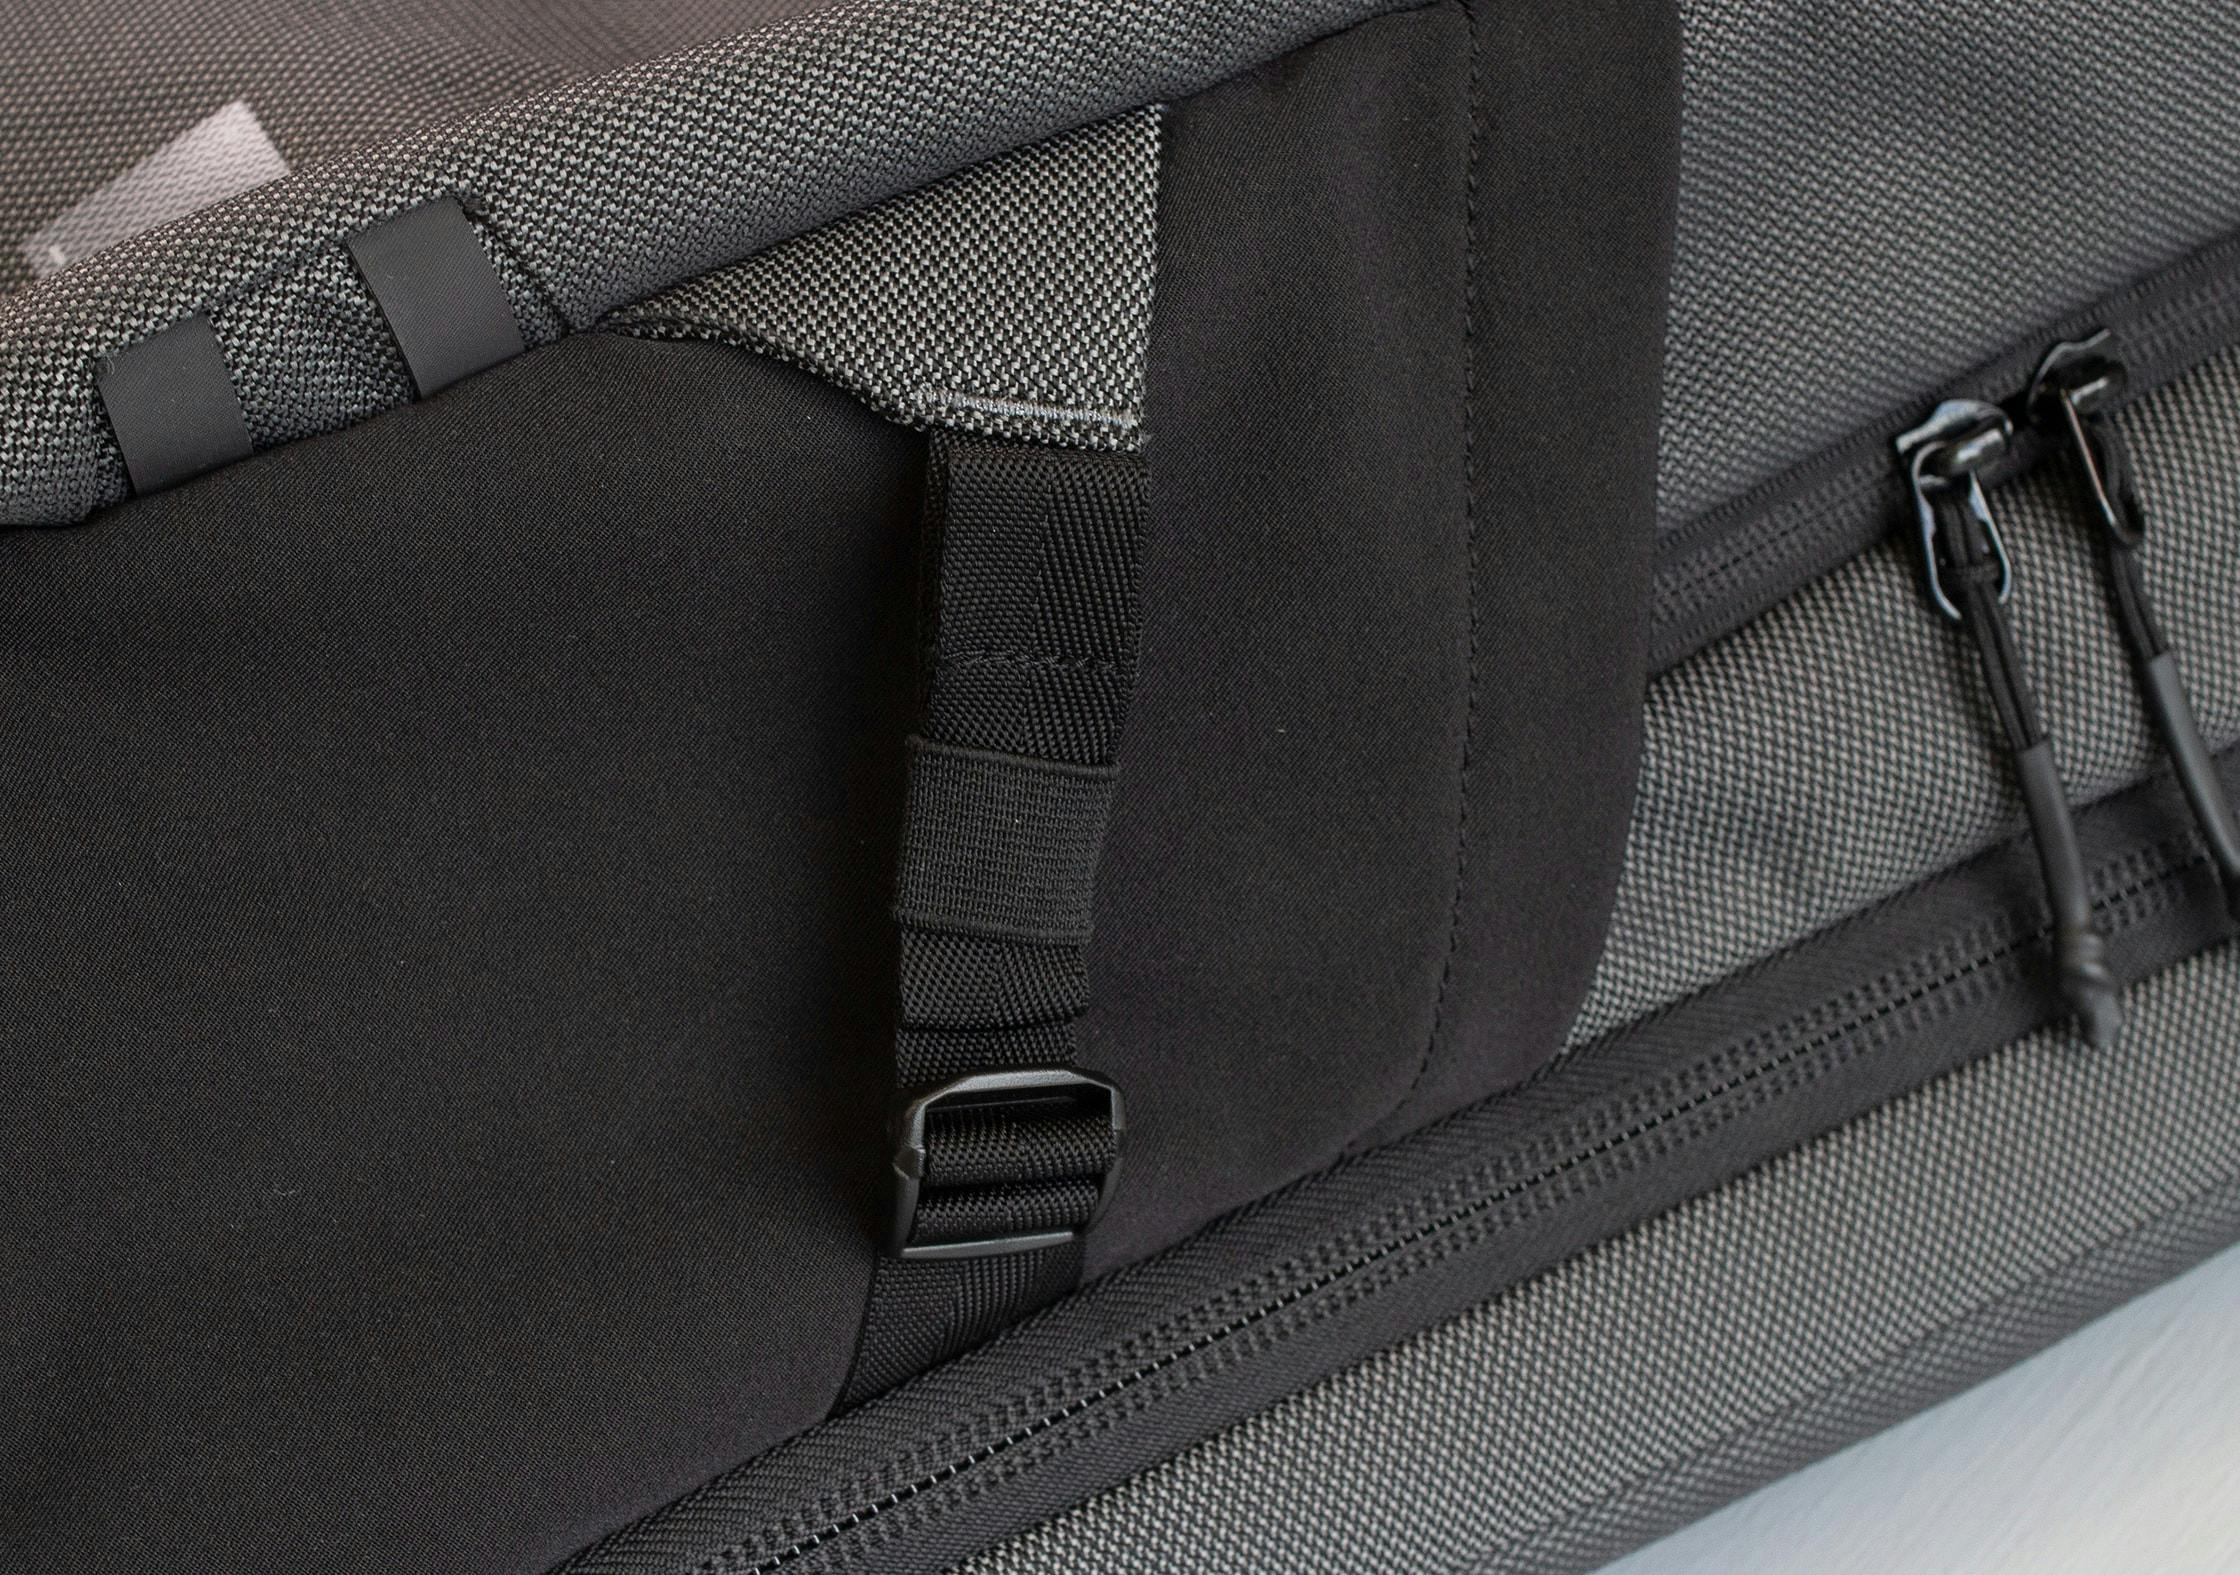 Heimplanet Transit Travel Pack Review | Pack Hacker